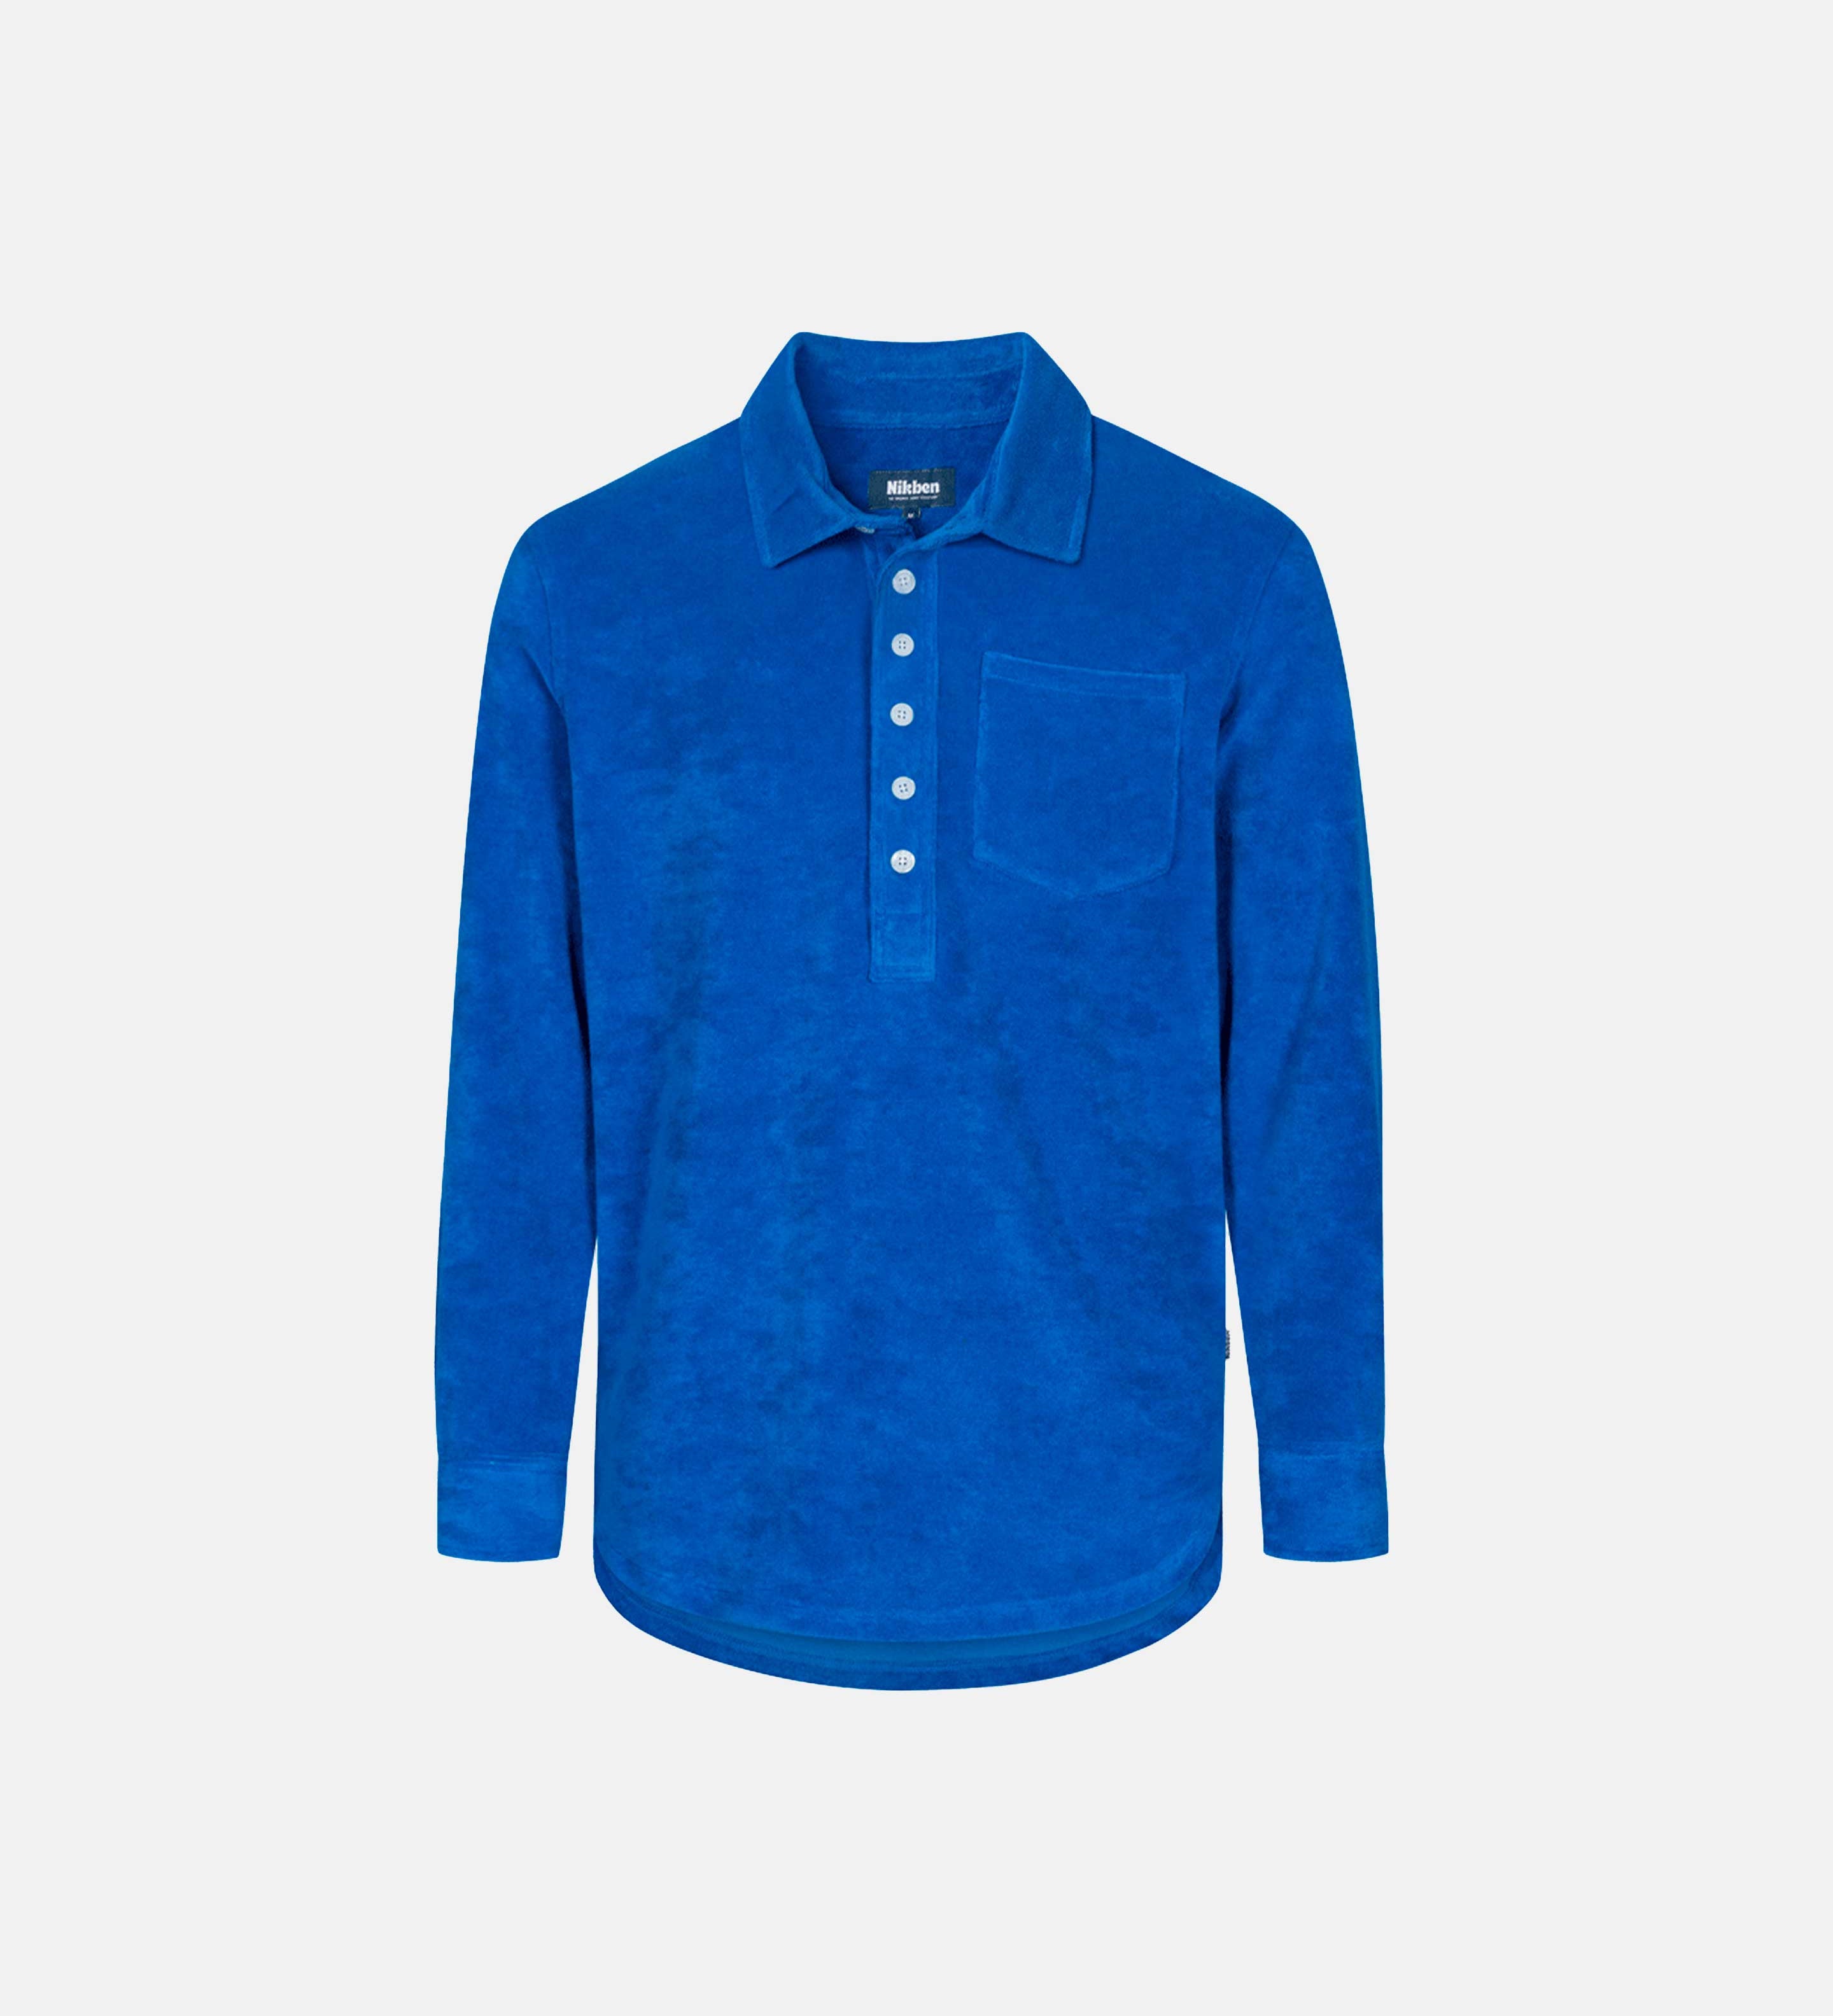 Blue long sleeve shirt in terry toweling fabric with half button closure and one chest pocket